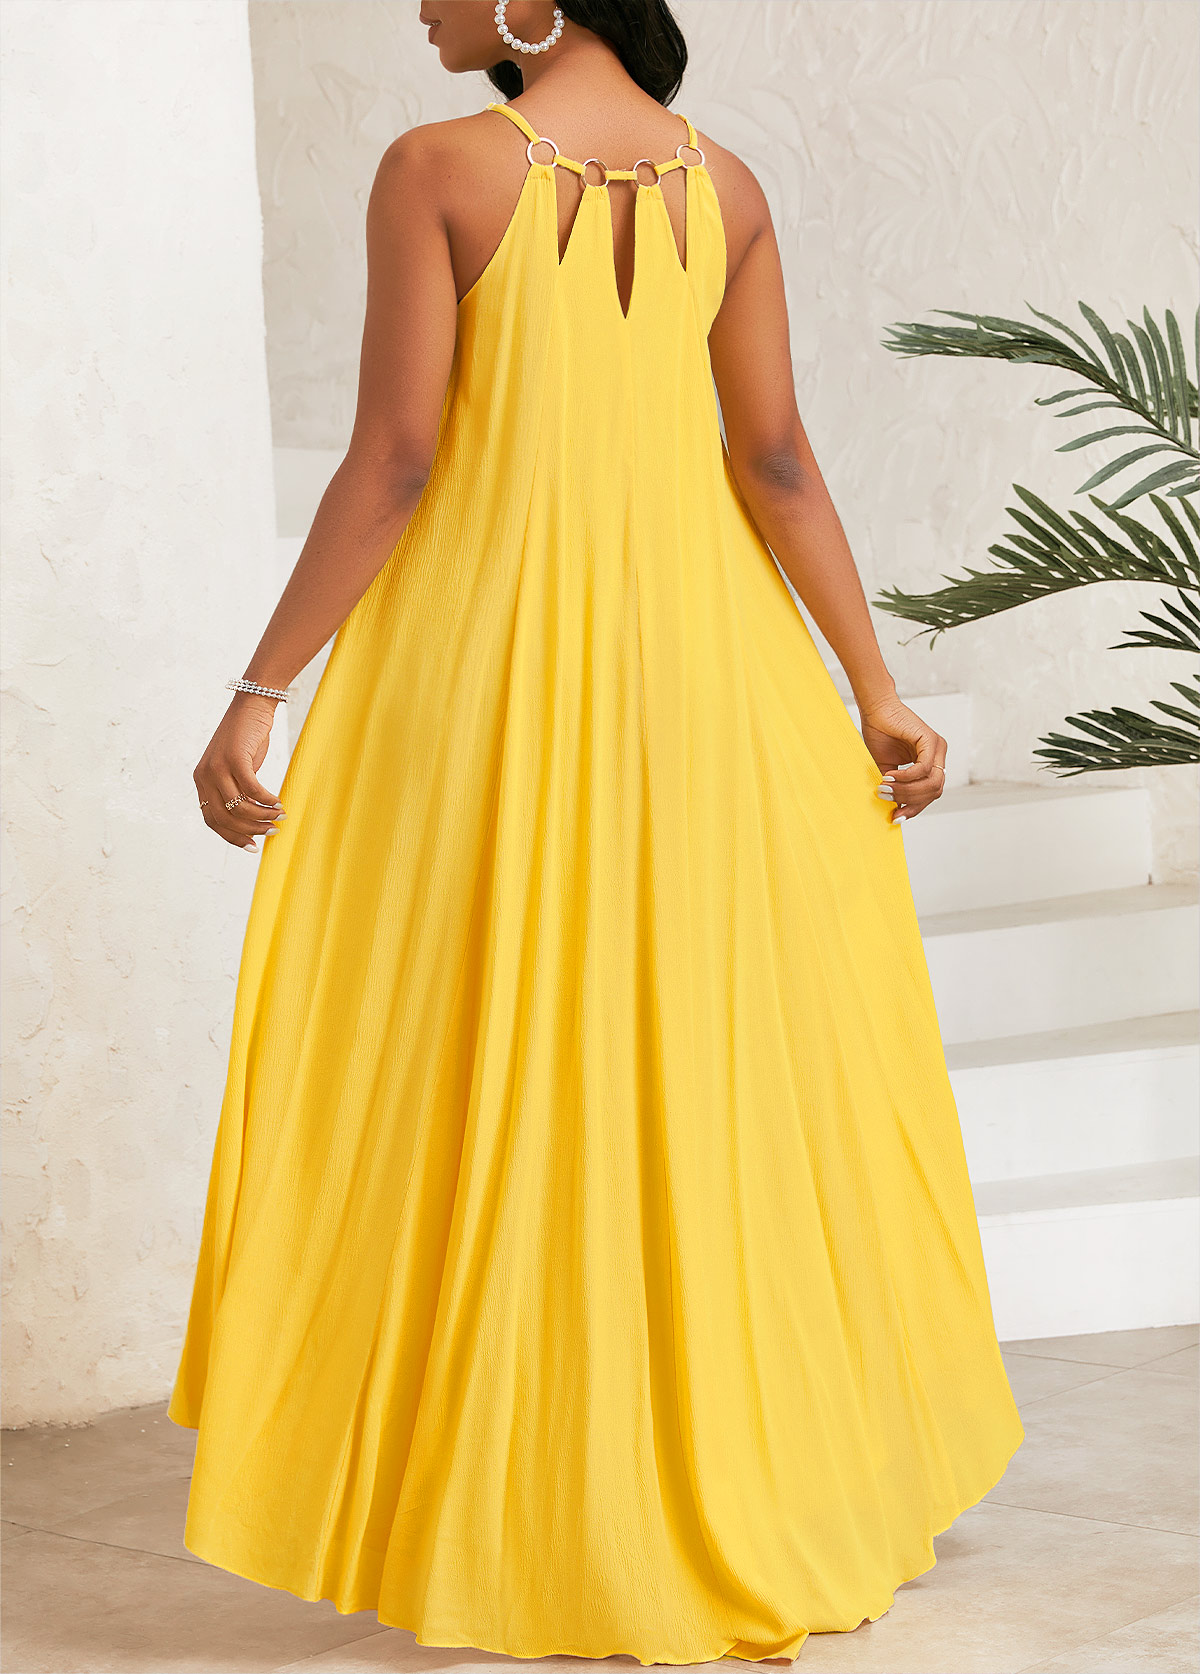 Circular Ring Yellow High Low A Line Strappy Dress